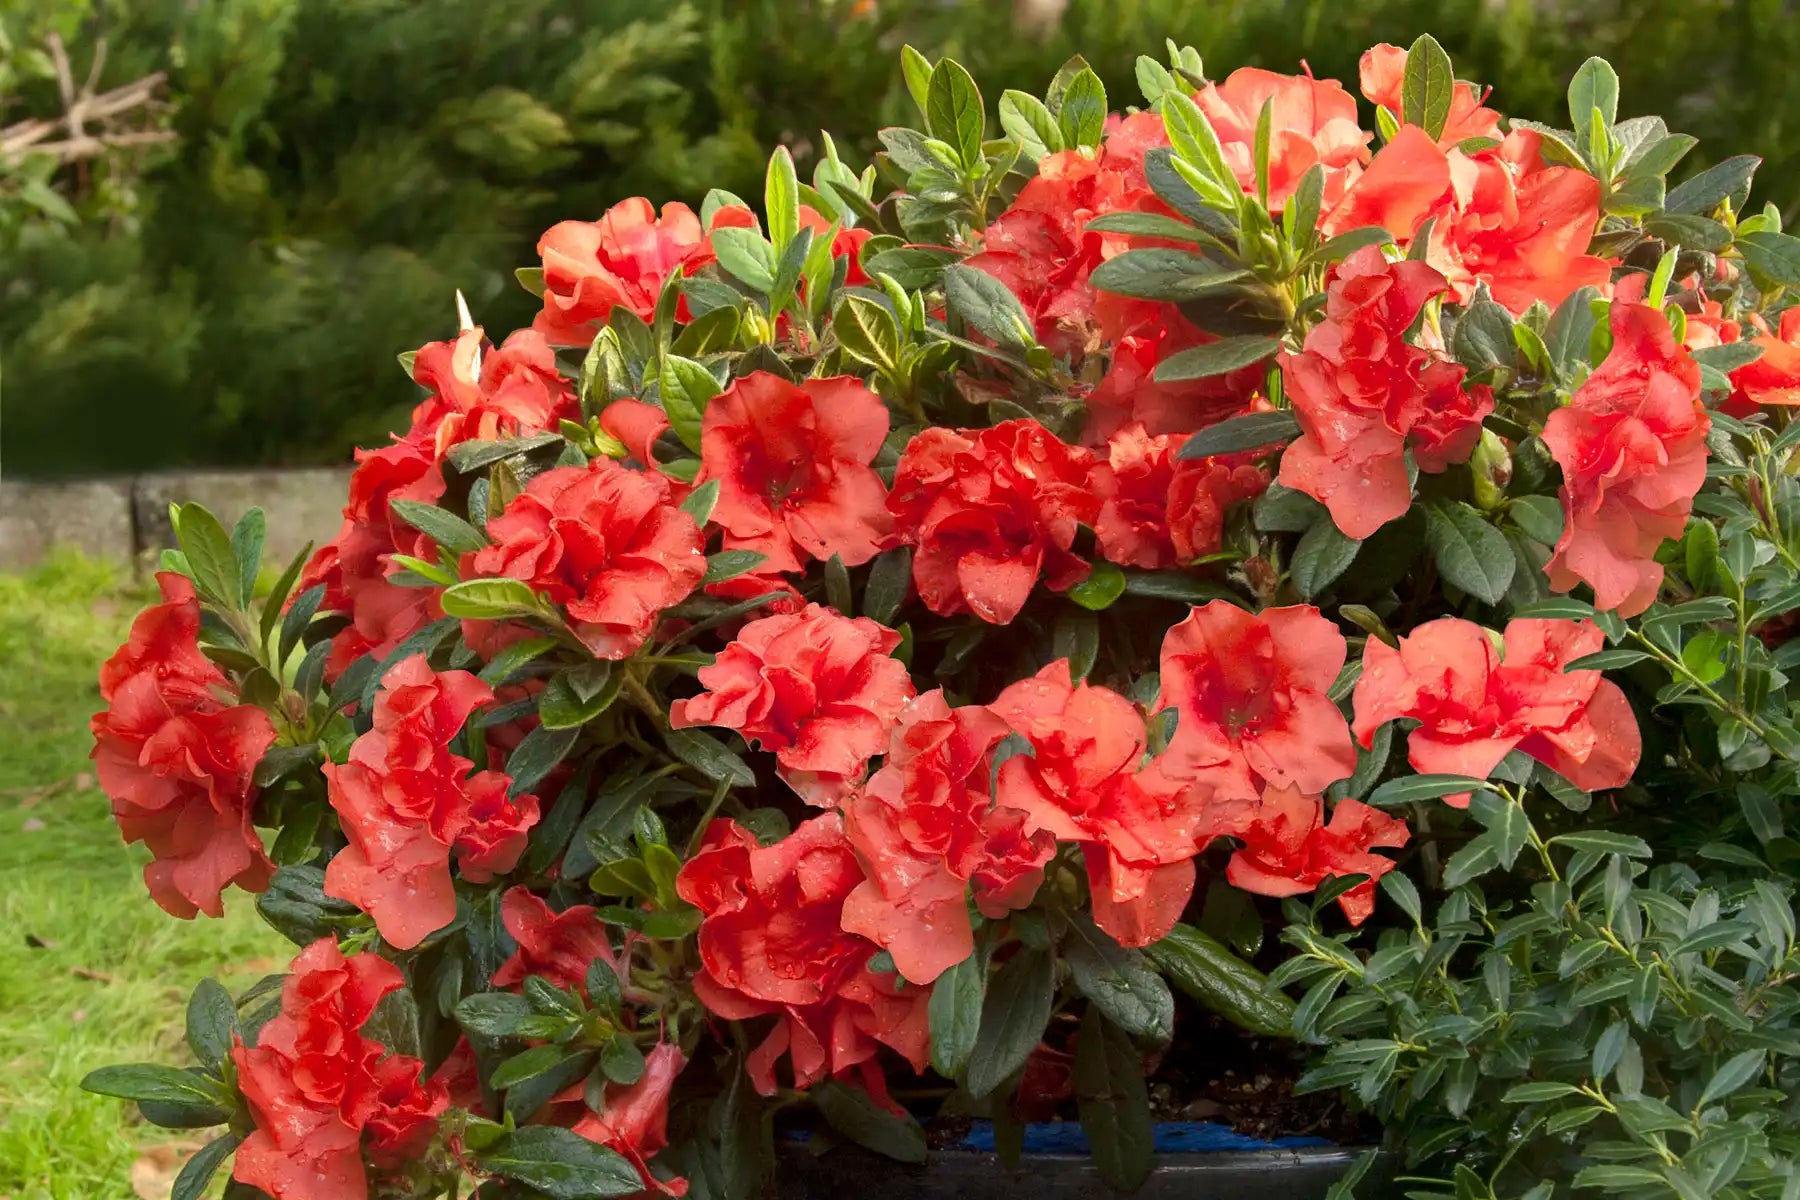 Densely-packed blossoms of the Autumn Embers® azalea shows off deep red-orange petals with its evergreen leaves poking through. Evergreen trees in contrast to the glowing color of these large blooms are seen in the background.